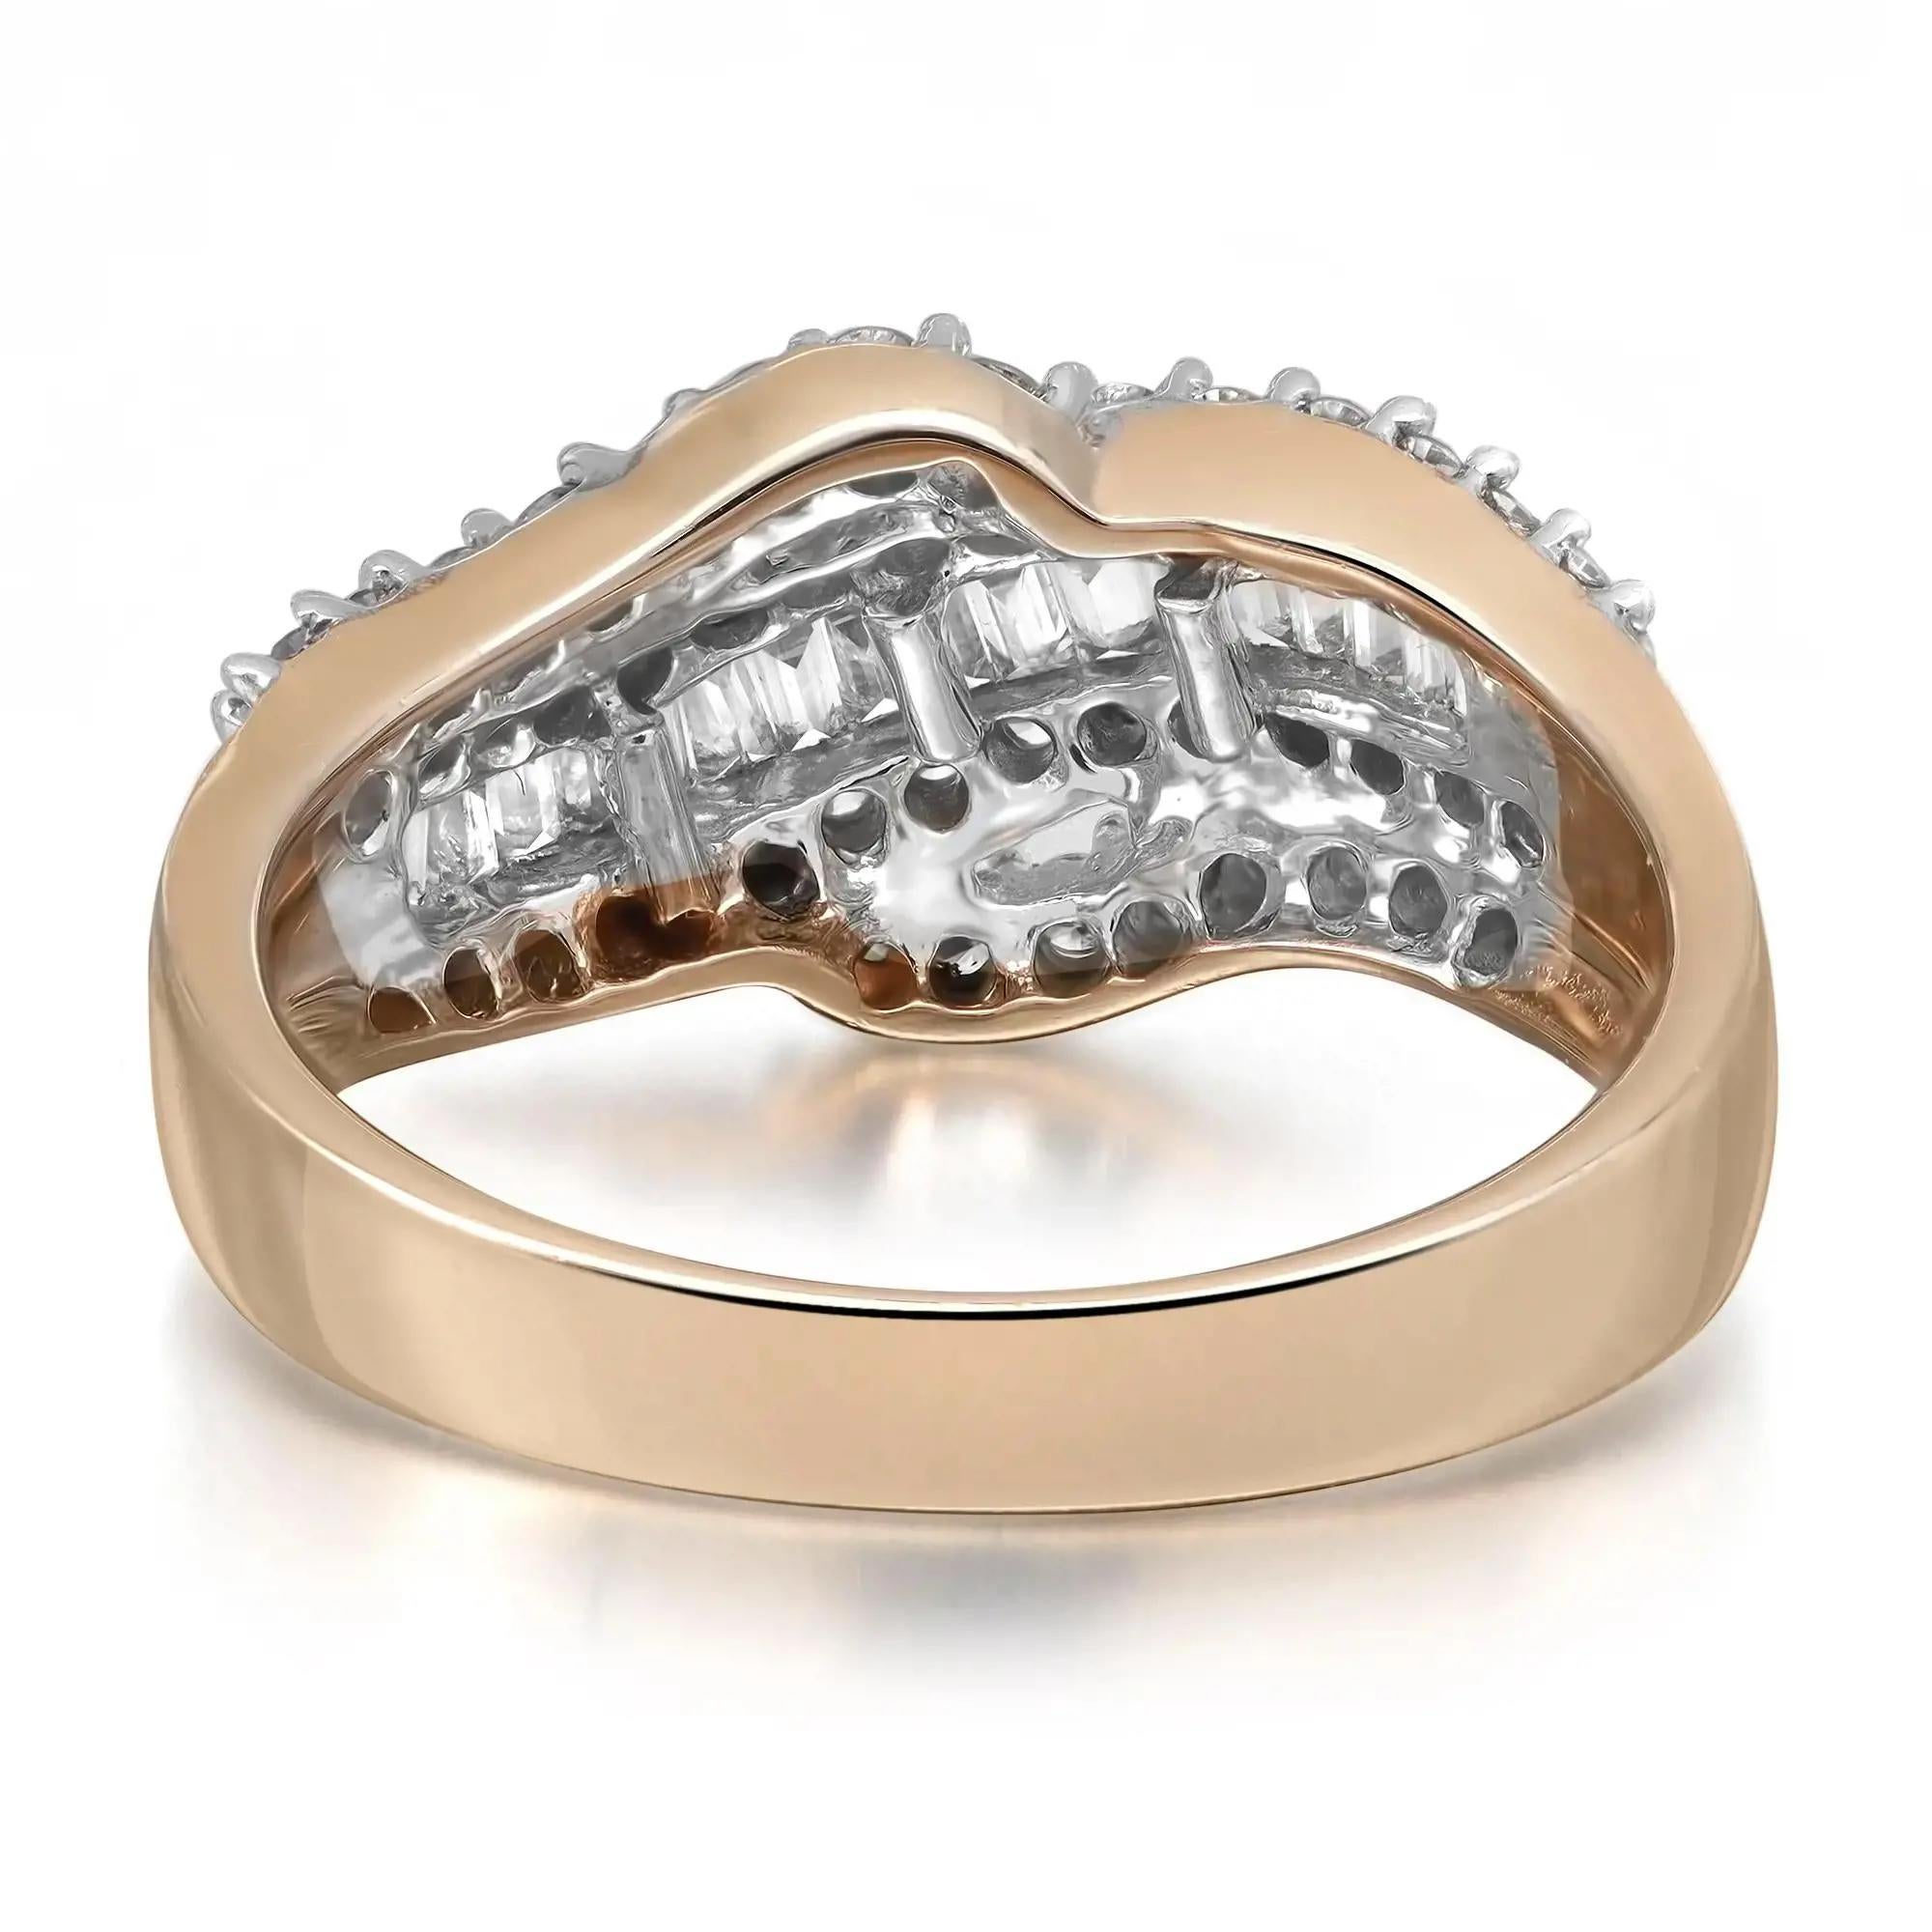 Beautiful and chic, natural diamond ladies cocktail ring crafted in 14k rose gold. This fancy ring is highlighted with 0.28 carat of channel set baguette cut and 0.61 carat of prong set round cut dazzling diamonds with I color and SI clarity. Total